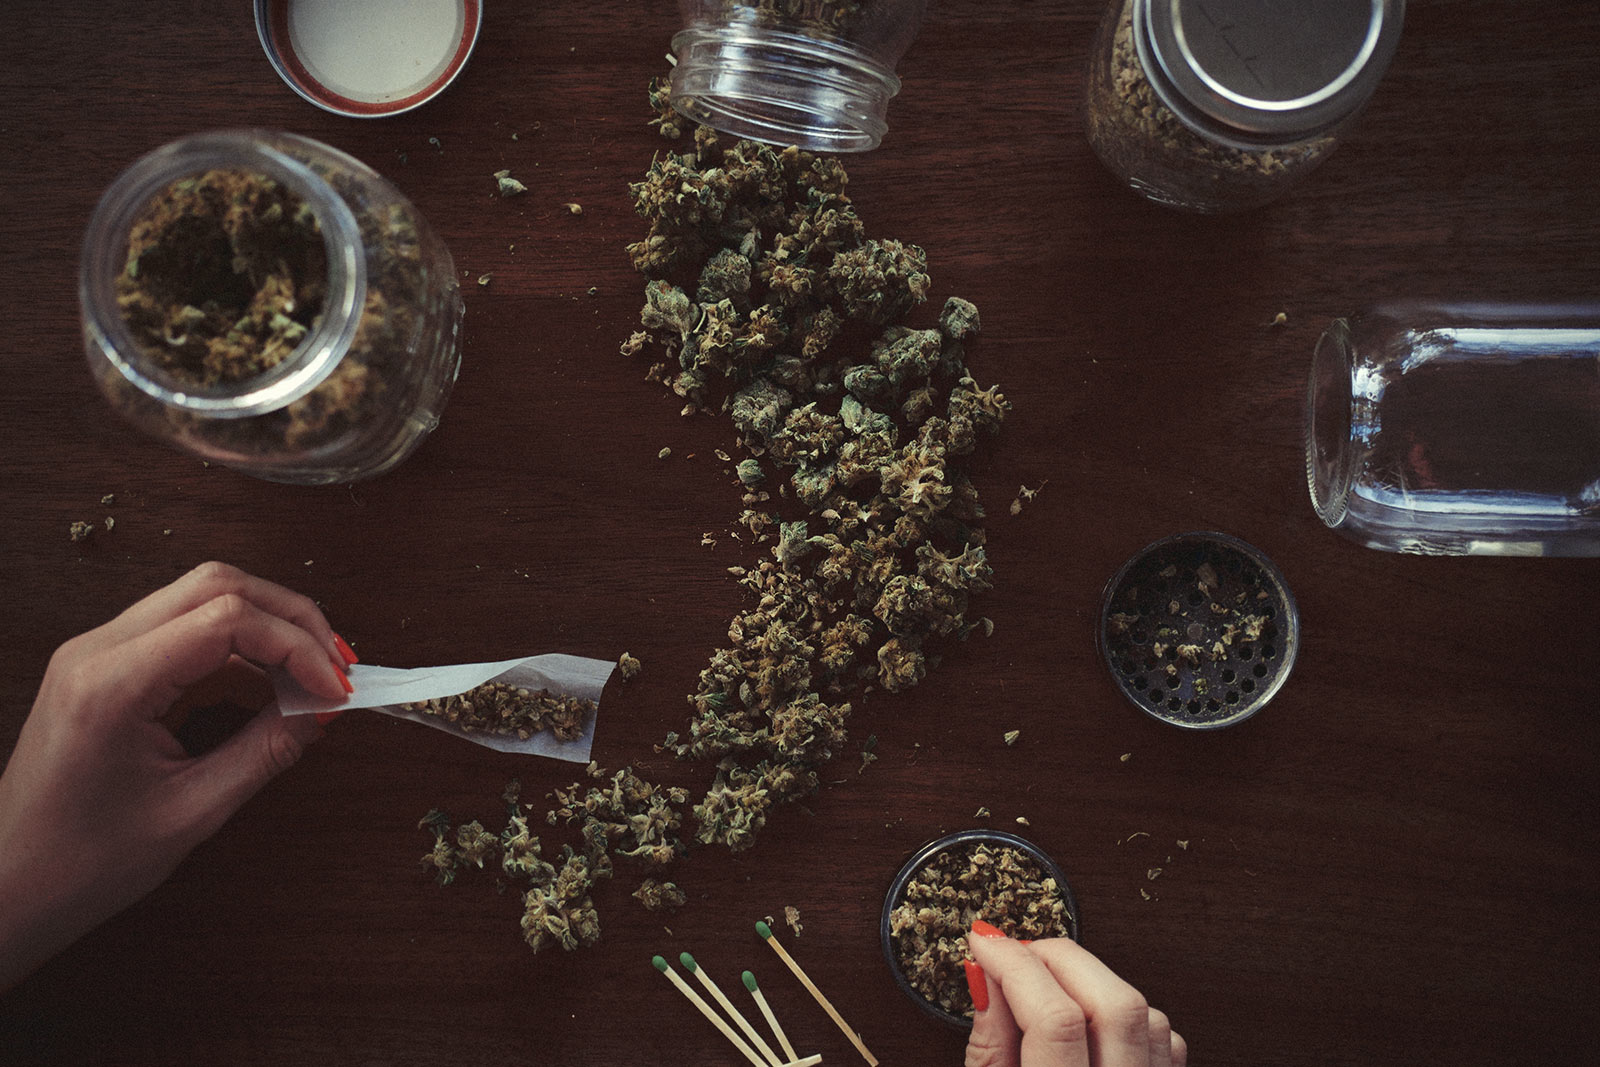 Cannabis covers the table while a woman rolls it into joints